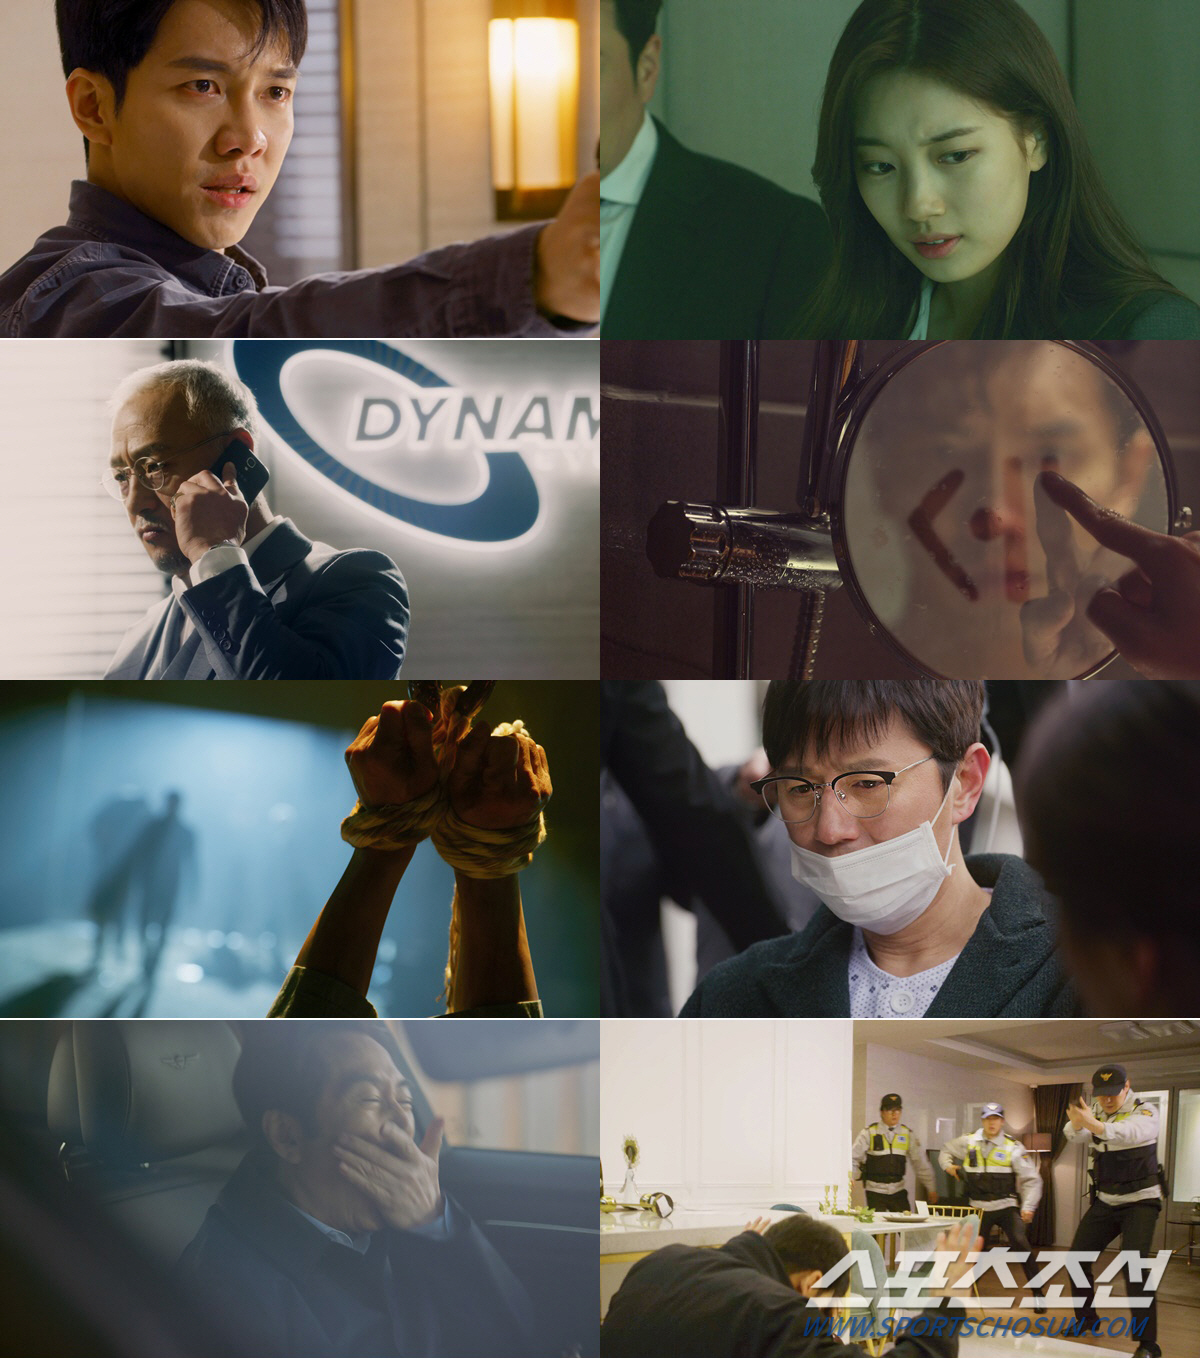 SBS gilt drama Vagabond, which has only two times to the end, continues to catch up with the end.In the 15th trailer of Vagabond released on the 22nd, Lee Seung-gi and Bae Suzy were one step closer to the truth of Planes terror.Gohari (Bae Suzy) and Kim Se-hoon (Shin Seung-hwan) who visited the mental hospital find out that Kim Song Yuqi (Jang Hyuk-jin) disappeared with only blood stains, and Kitaewoong (Shin Sung-rok) suspects that Oh Sang-mi (Kang Kyung-heon) and Kim Song Yuqi disappeared at the same time.Cha Dal-gun (Lee Seung-gi), who ran after receiving a call from Sang-mi, fought with Jerome (Yoo Tae-oh) for life and death, and told President Jungkook (Yun-shik Baek), Have you ever thought you were in a trap?I ask a question of stone fastball.However, after Chadalgan was overpowered by the police, he said, What are you?, and in the meantime, the relaxed Prince Edward Island Park (Lee Kyung-young) is more curious.In the 15th episode, Kim Joo-chul (Lee Gi-young) was skillfully digging into the truth of Planes terror, while Yoon Han-ki (Kim Min-jong), the chief of civil affairs who voluntarily appeared at the NIS, was also seen handing secret materials to Kitaewoong.Jungkook, who was in trouble drinking alone, took a large amount of medicine, and also showed someone in Danger facing fire with his hands tied in the lungs.Vagabond said: Only two more episodes left, with Dalgan and Harry witnessing the shocking truth.Jungkook, Yoon Han-ki, Prince Edward Island Park, please watch the move. Vagabond is a drama in which a man digs up a huge national corruption found in the concealed truth of a civil passenger plane crash.It is an intelligence action melodrama with dangerous and naked adventures of family, affiliation and even the nameless Vagabond. The 15th episode airs at 10 p.m. on the 22nd.Following Vagabond, the stone direct office drama Stobrig starring Park Eun Bin will be broadcast from December 13th.